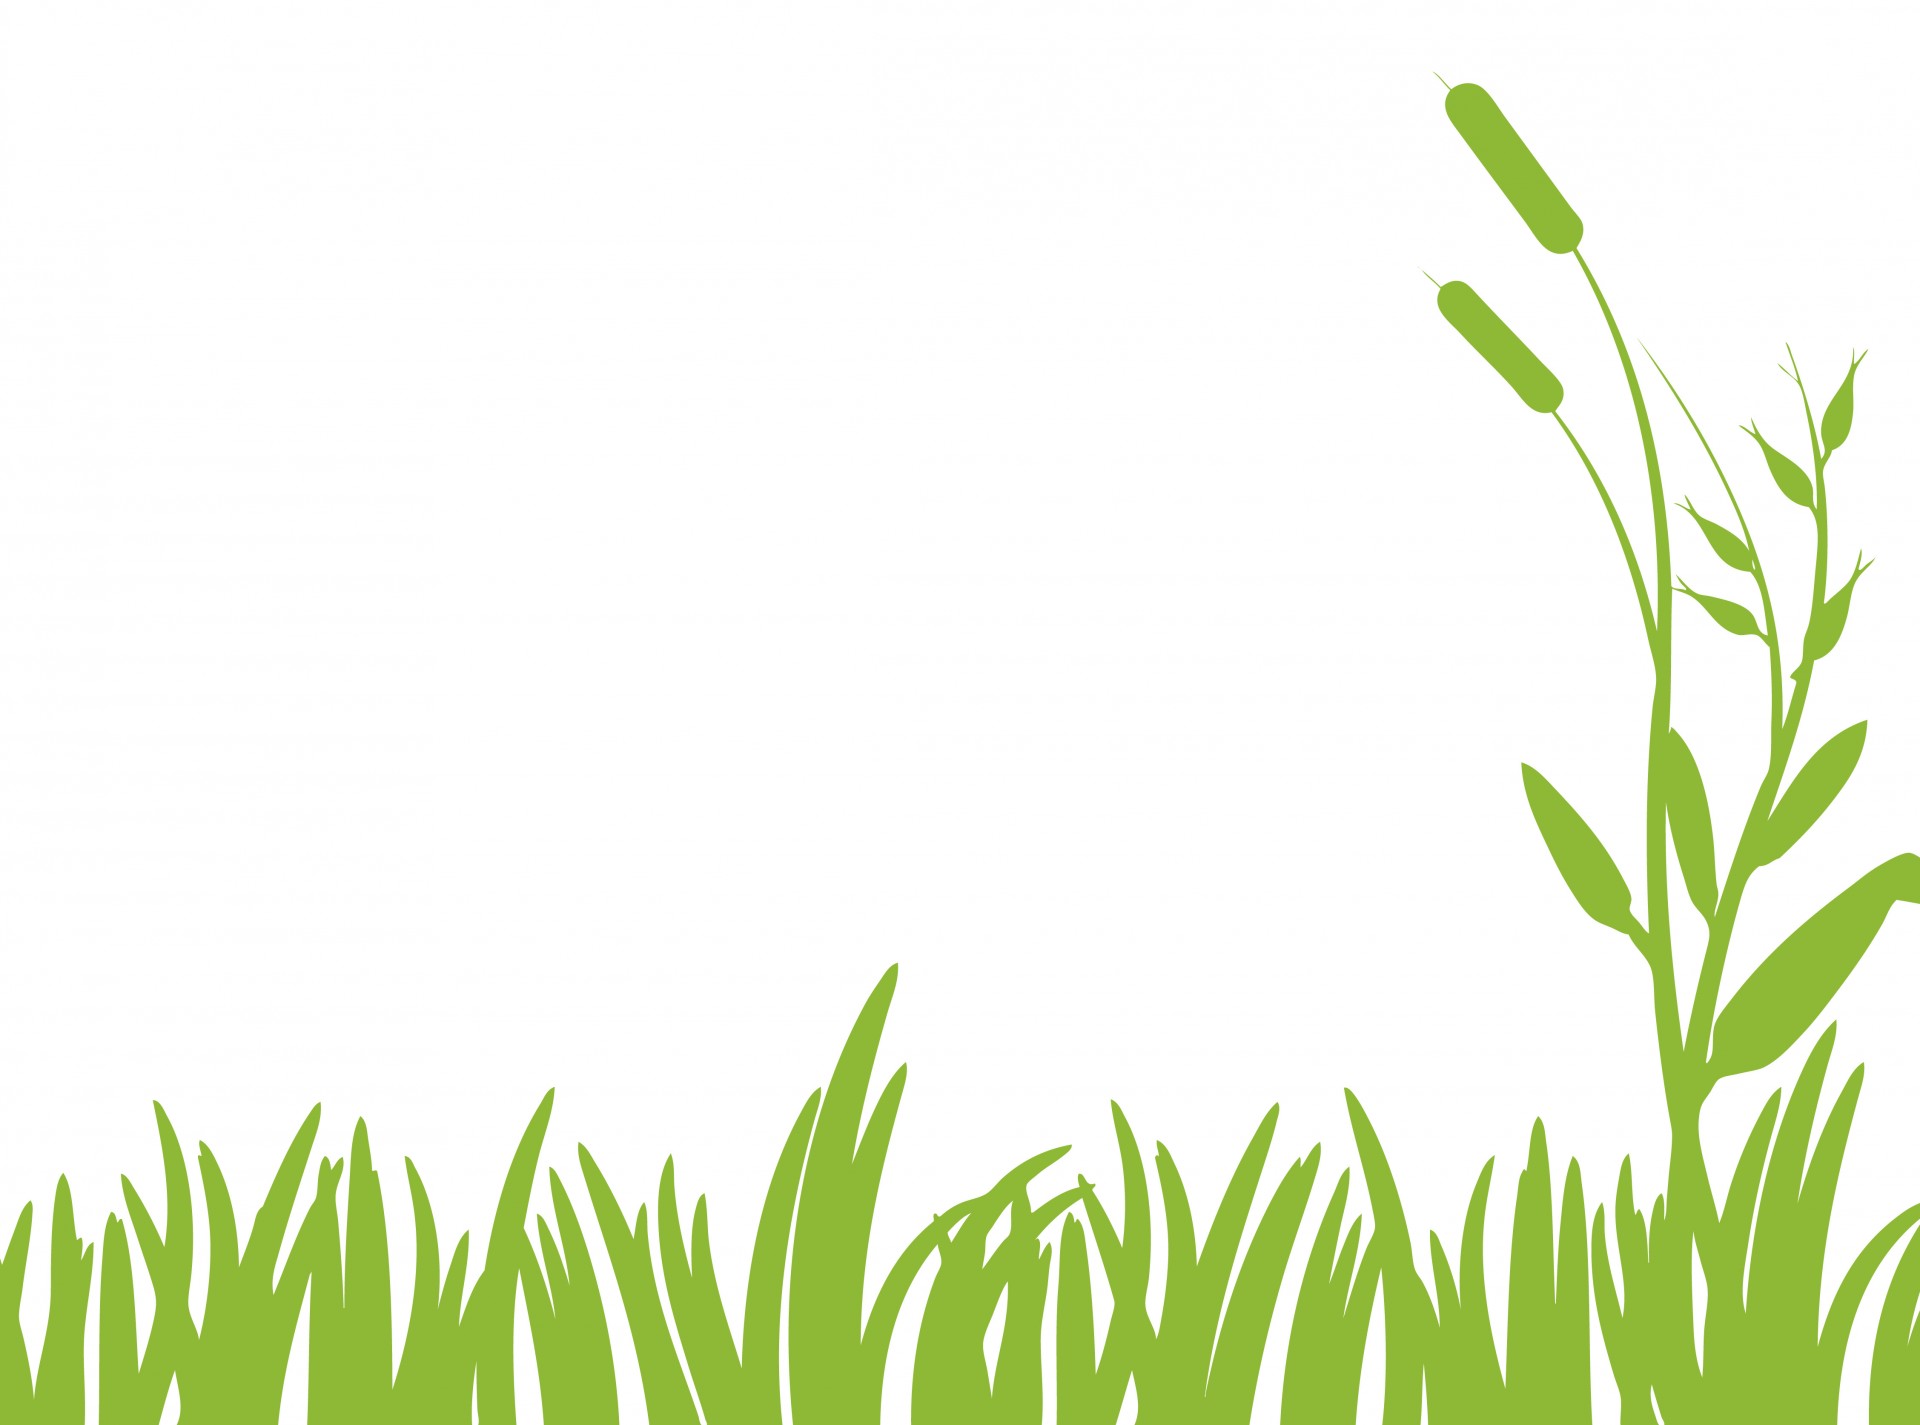 free grass pictures clip art - photo #37